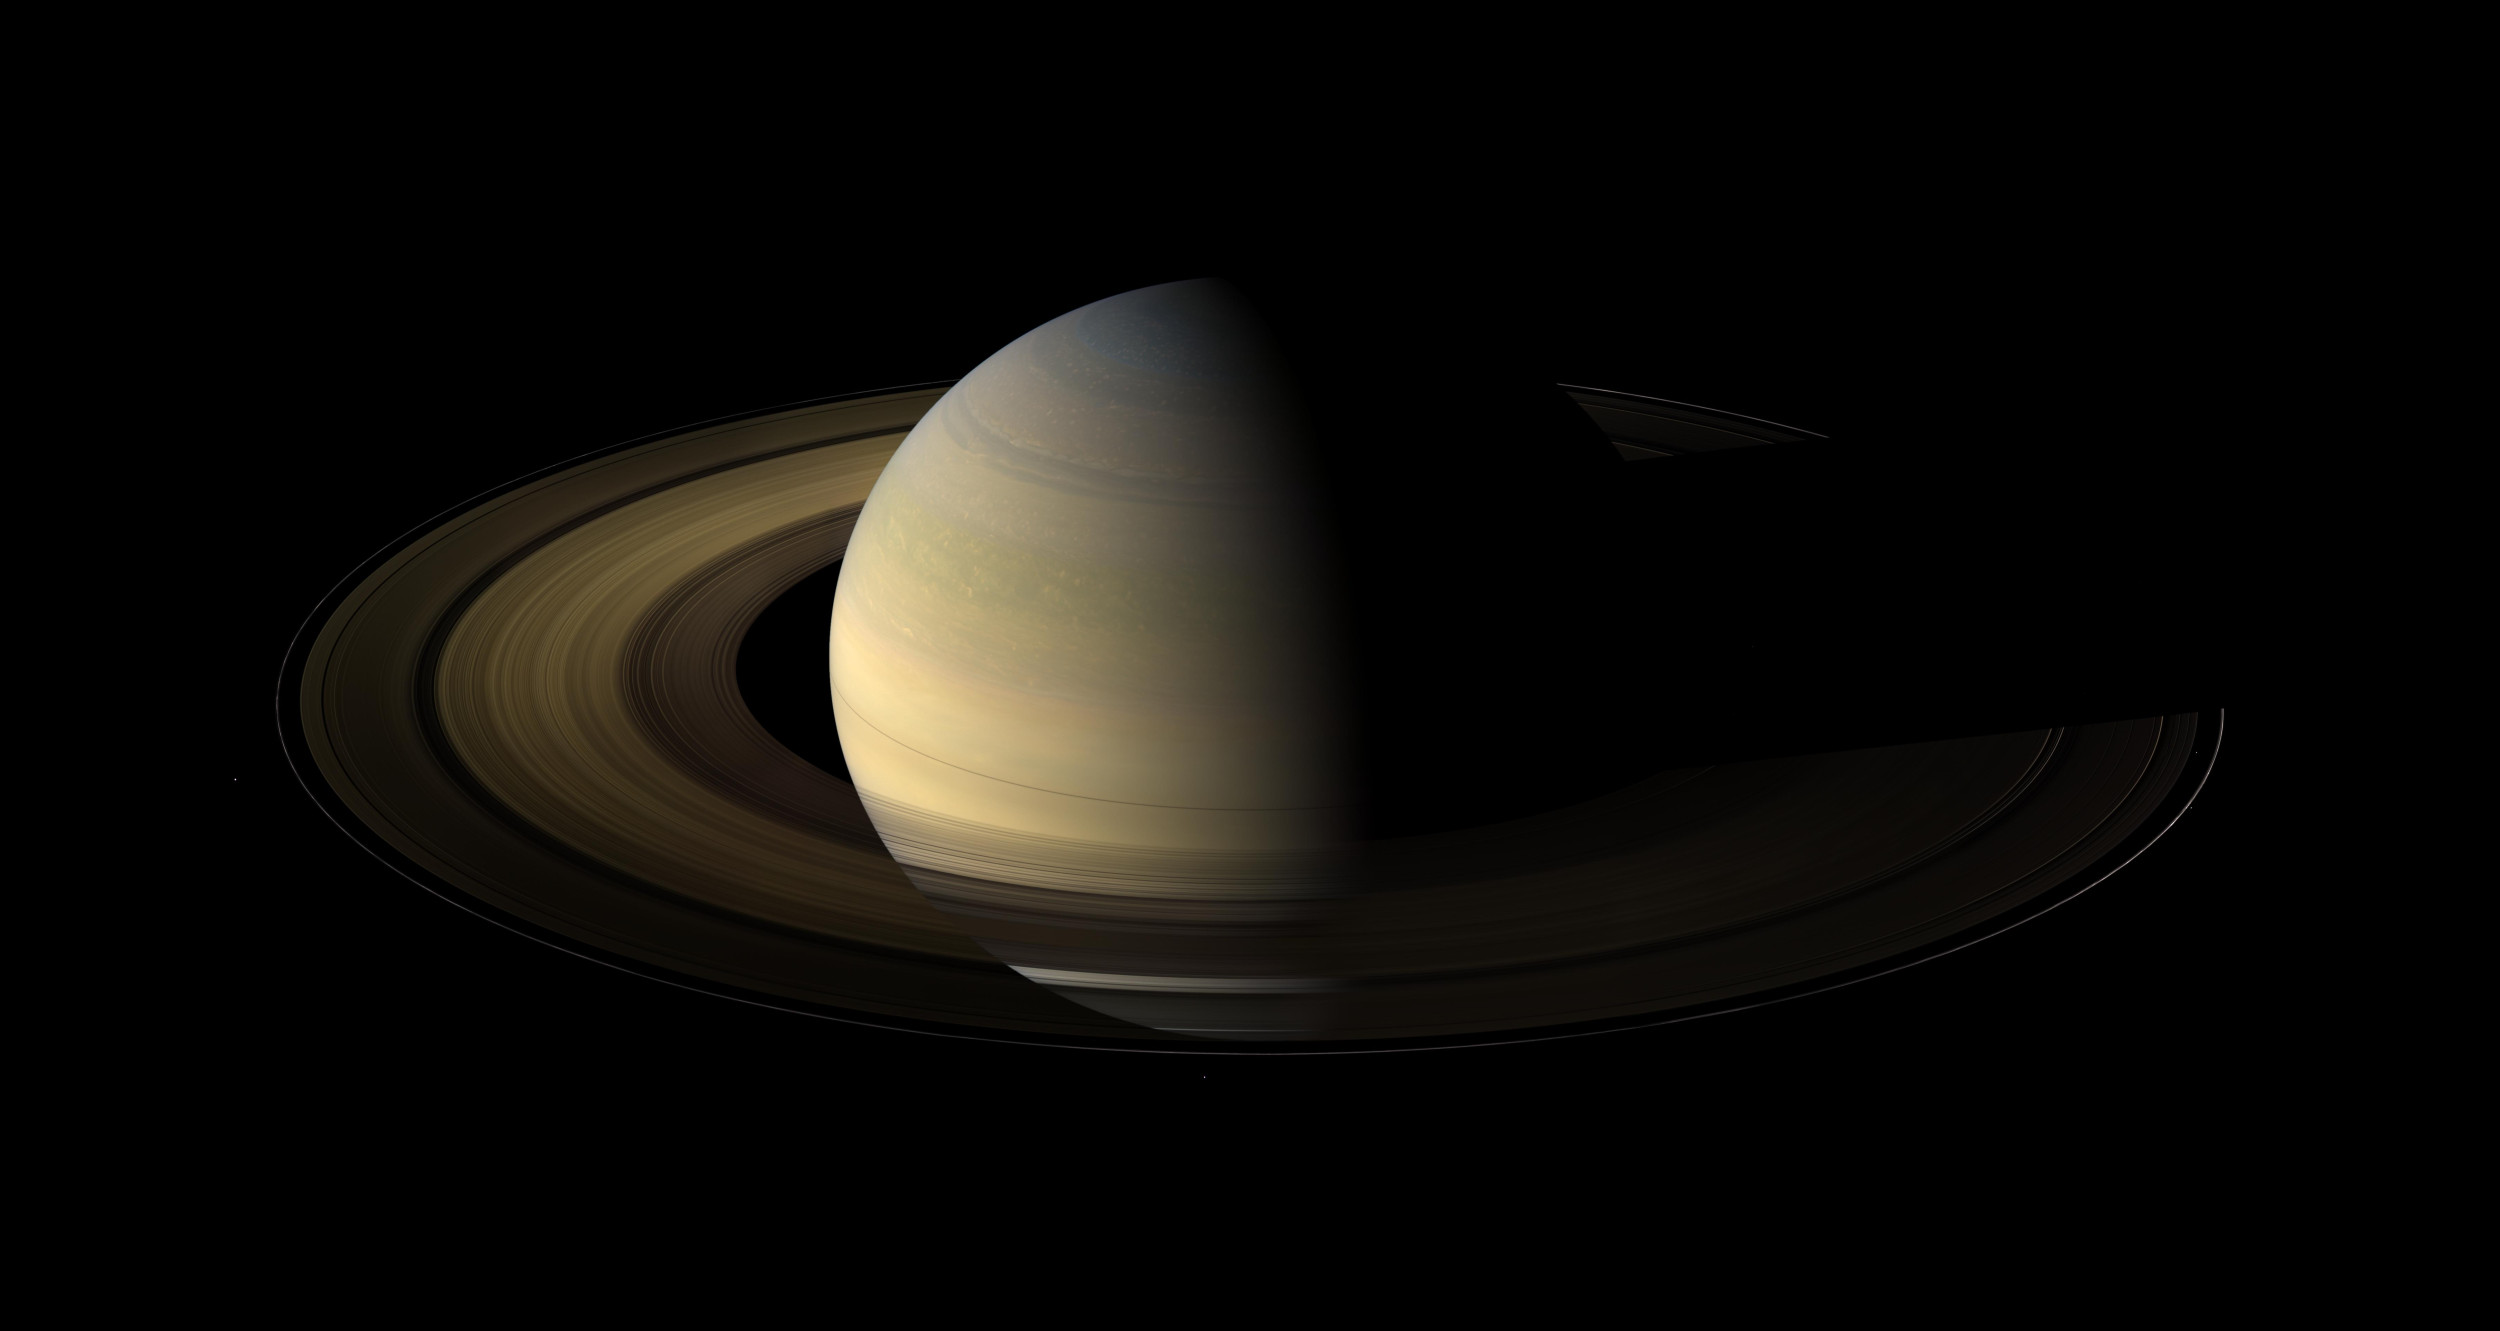 Saturn's rings much younger than planet itself, new study says - UPI.com